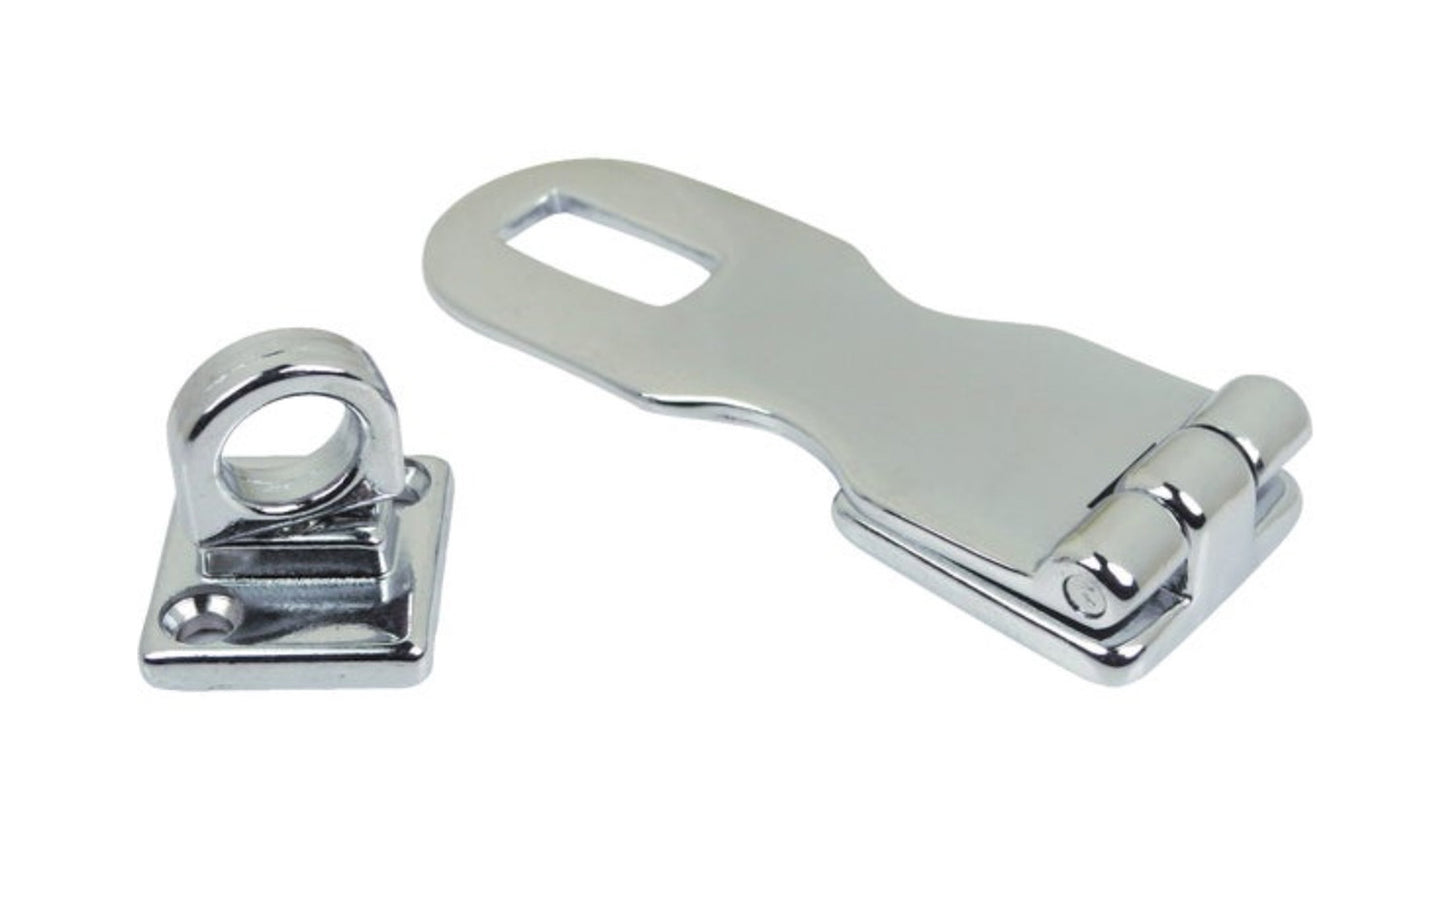 3" Chrome-Plated Cast Brass Swivel Eye Hasp. Triple chrome-plated. 3" x 1" overall size. Screws not included. Seachoice Model 37091. 719249370910